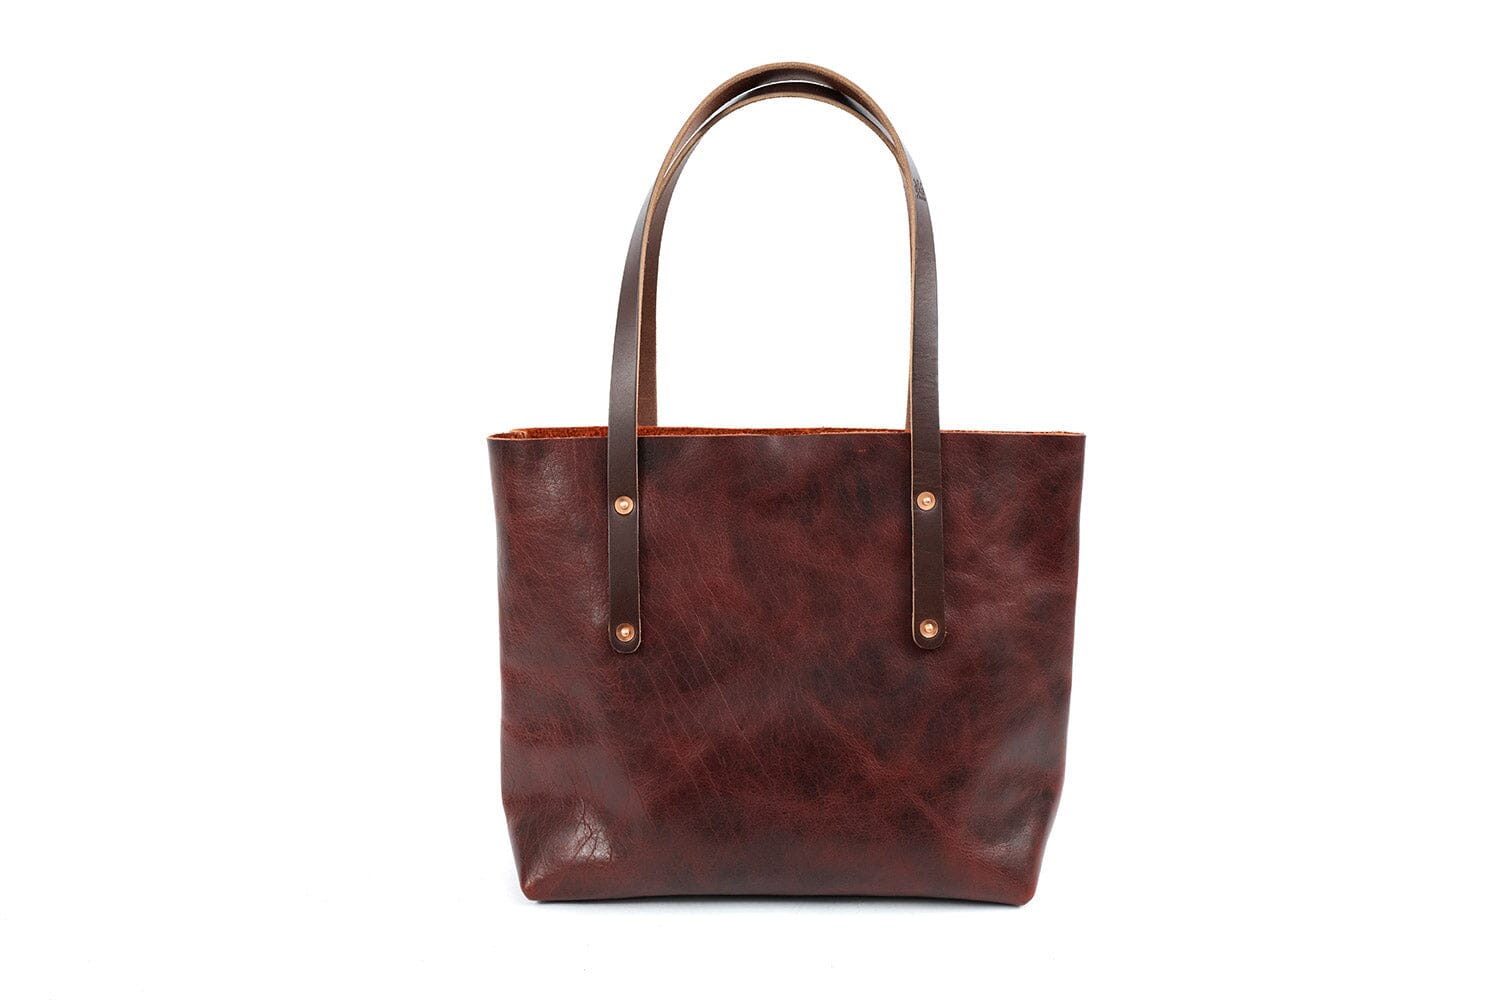 AVERY LEATHER TOTE BAG - SMALL - REDWOOD BISON